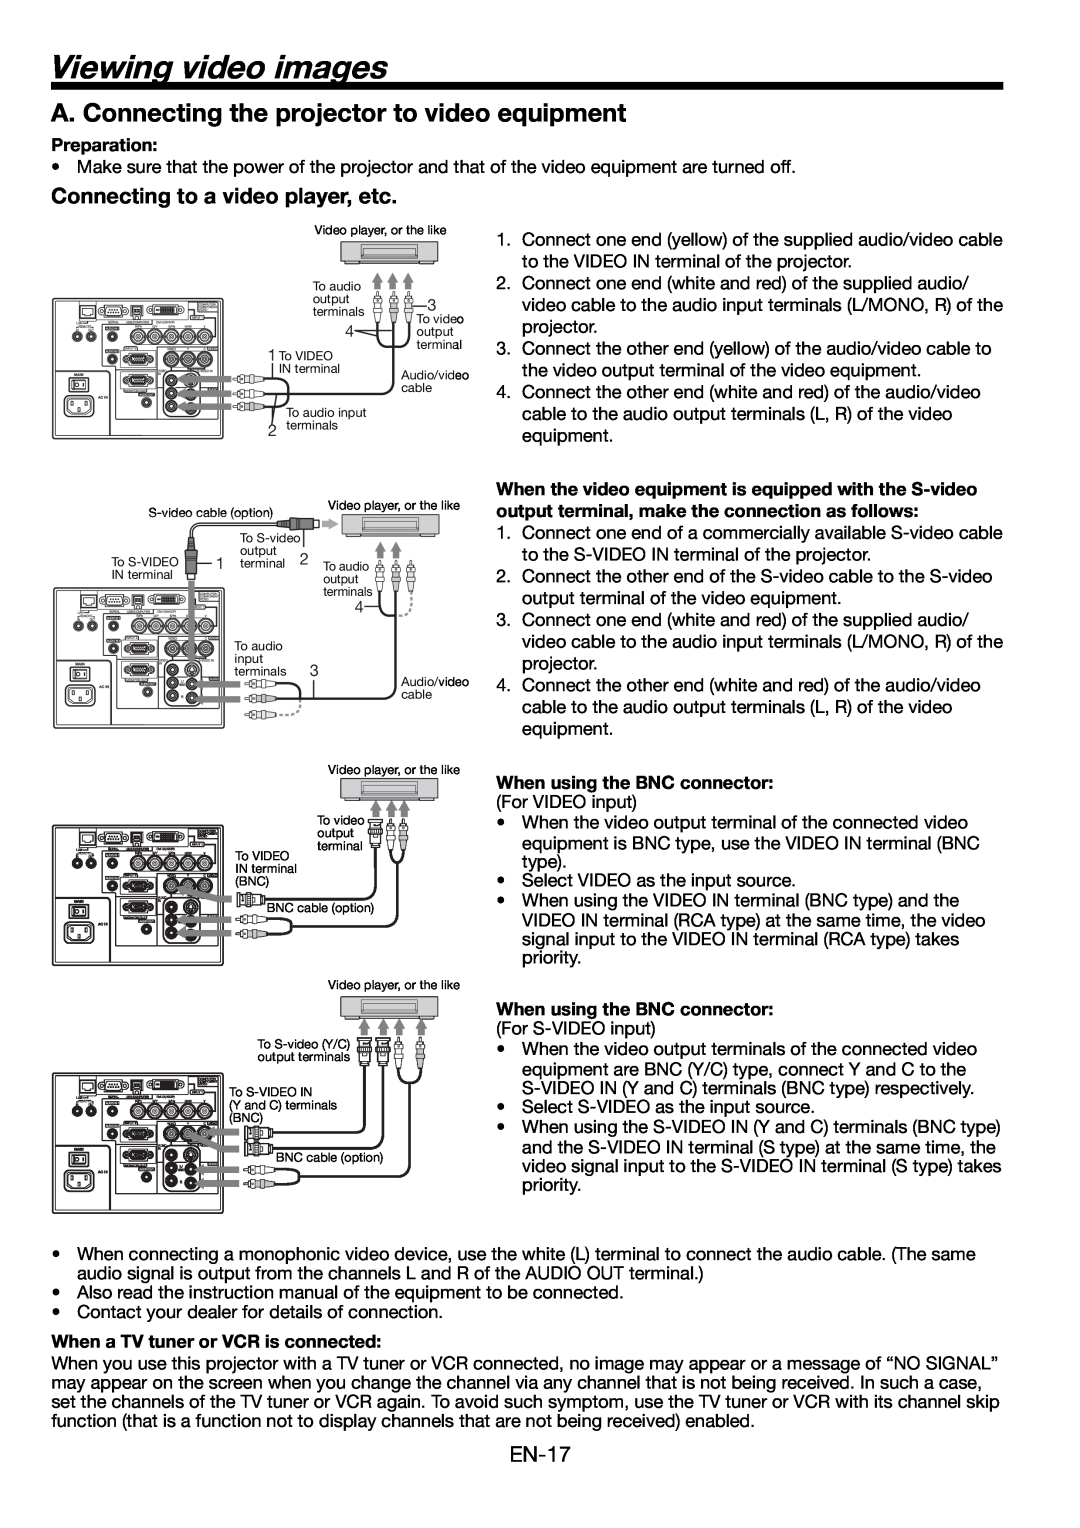 Mitsumi electronic HD8000 user manual Viewing video images, A. Connecting the projector to video equipment, Preparation 